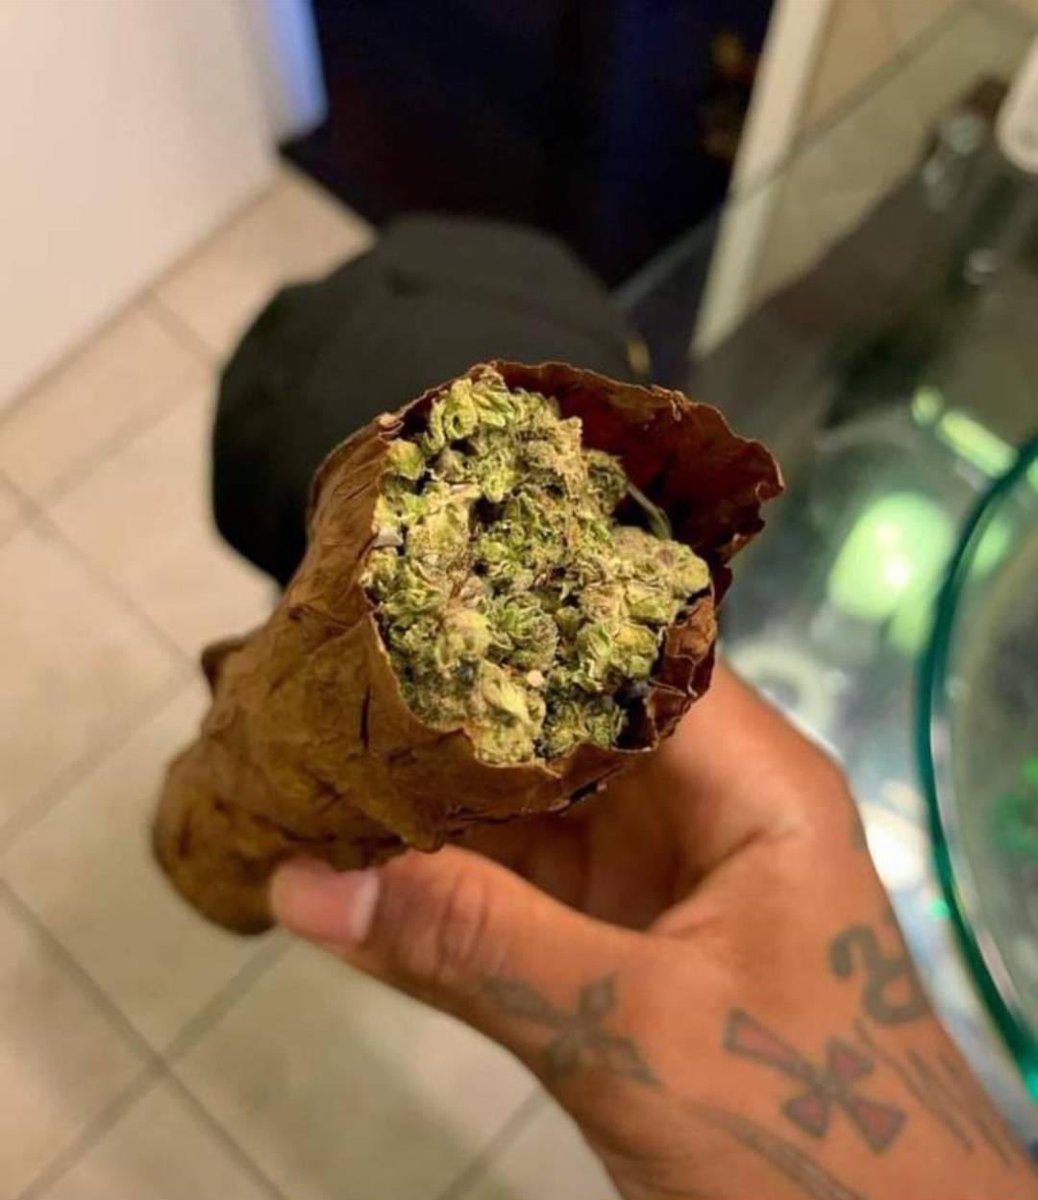 Would you smoke this?🤔

#Mmemberville #StonerFam #CannabisCommunity #WeedLovers